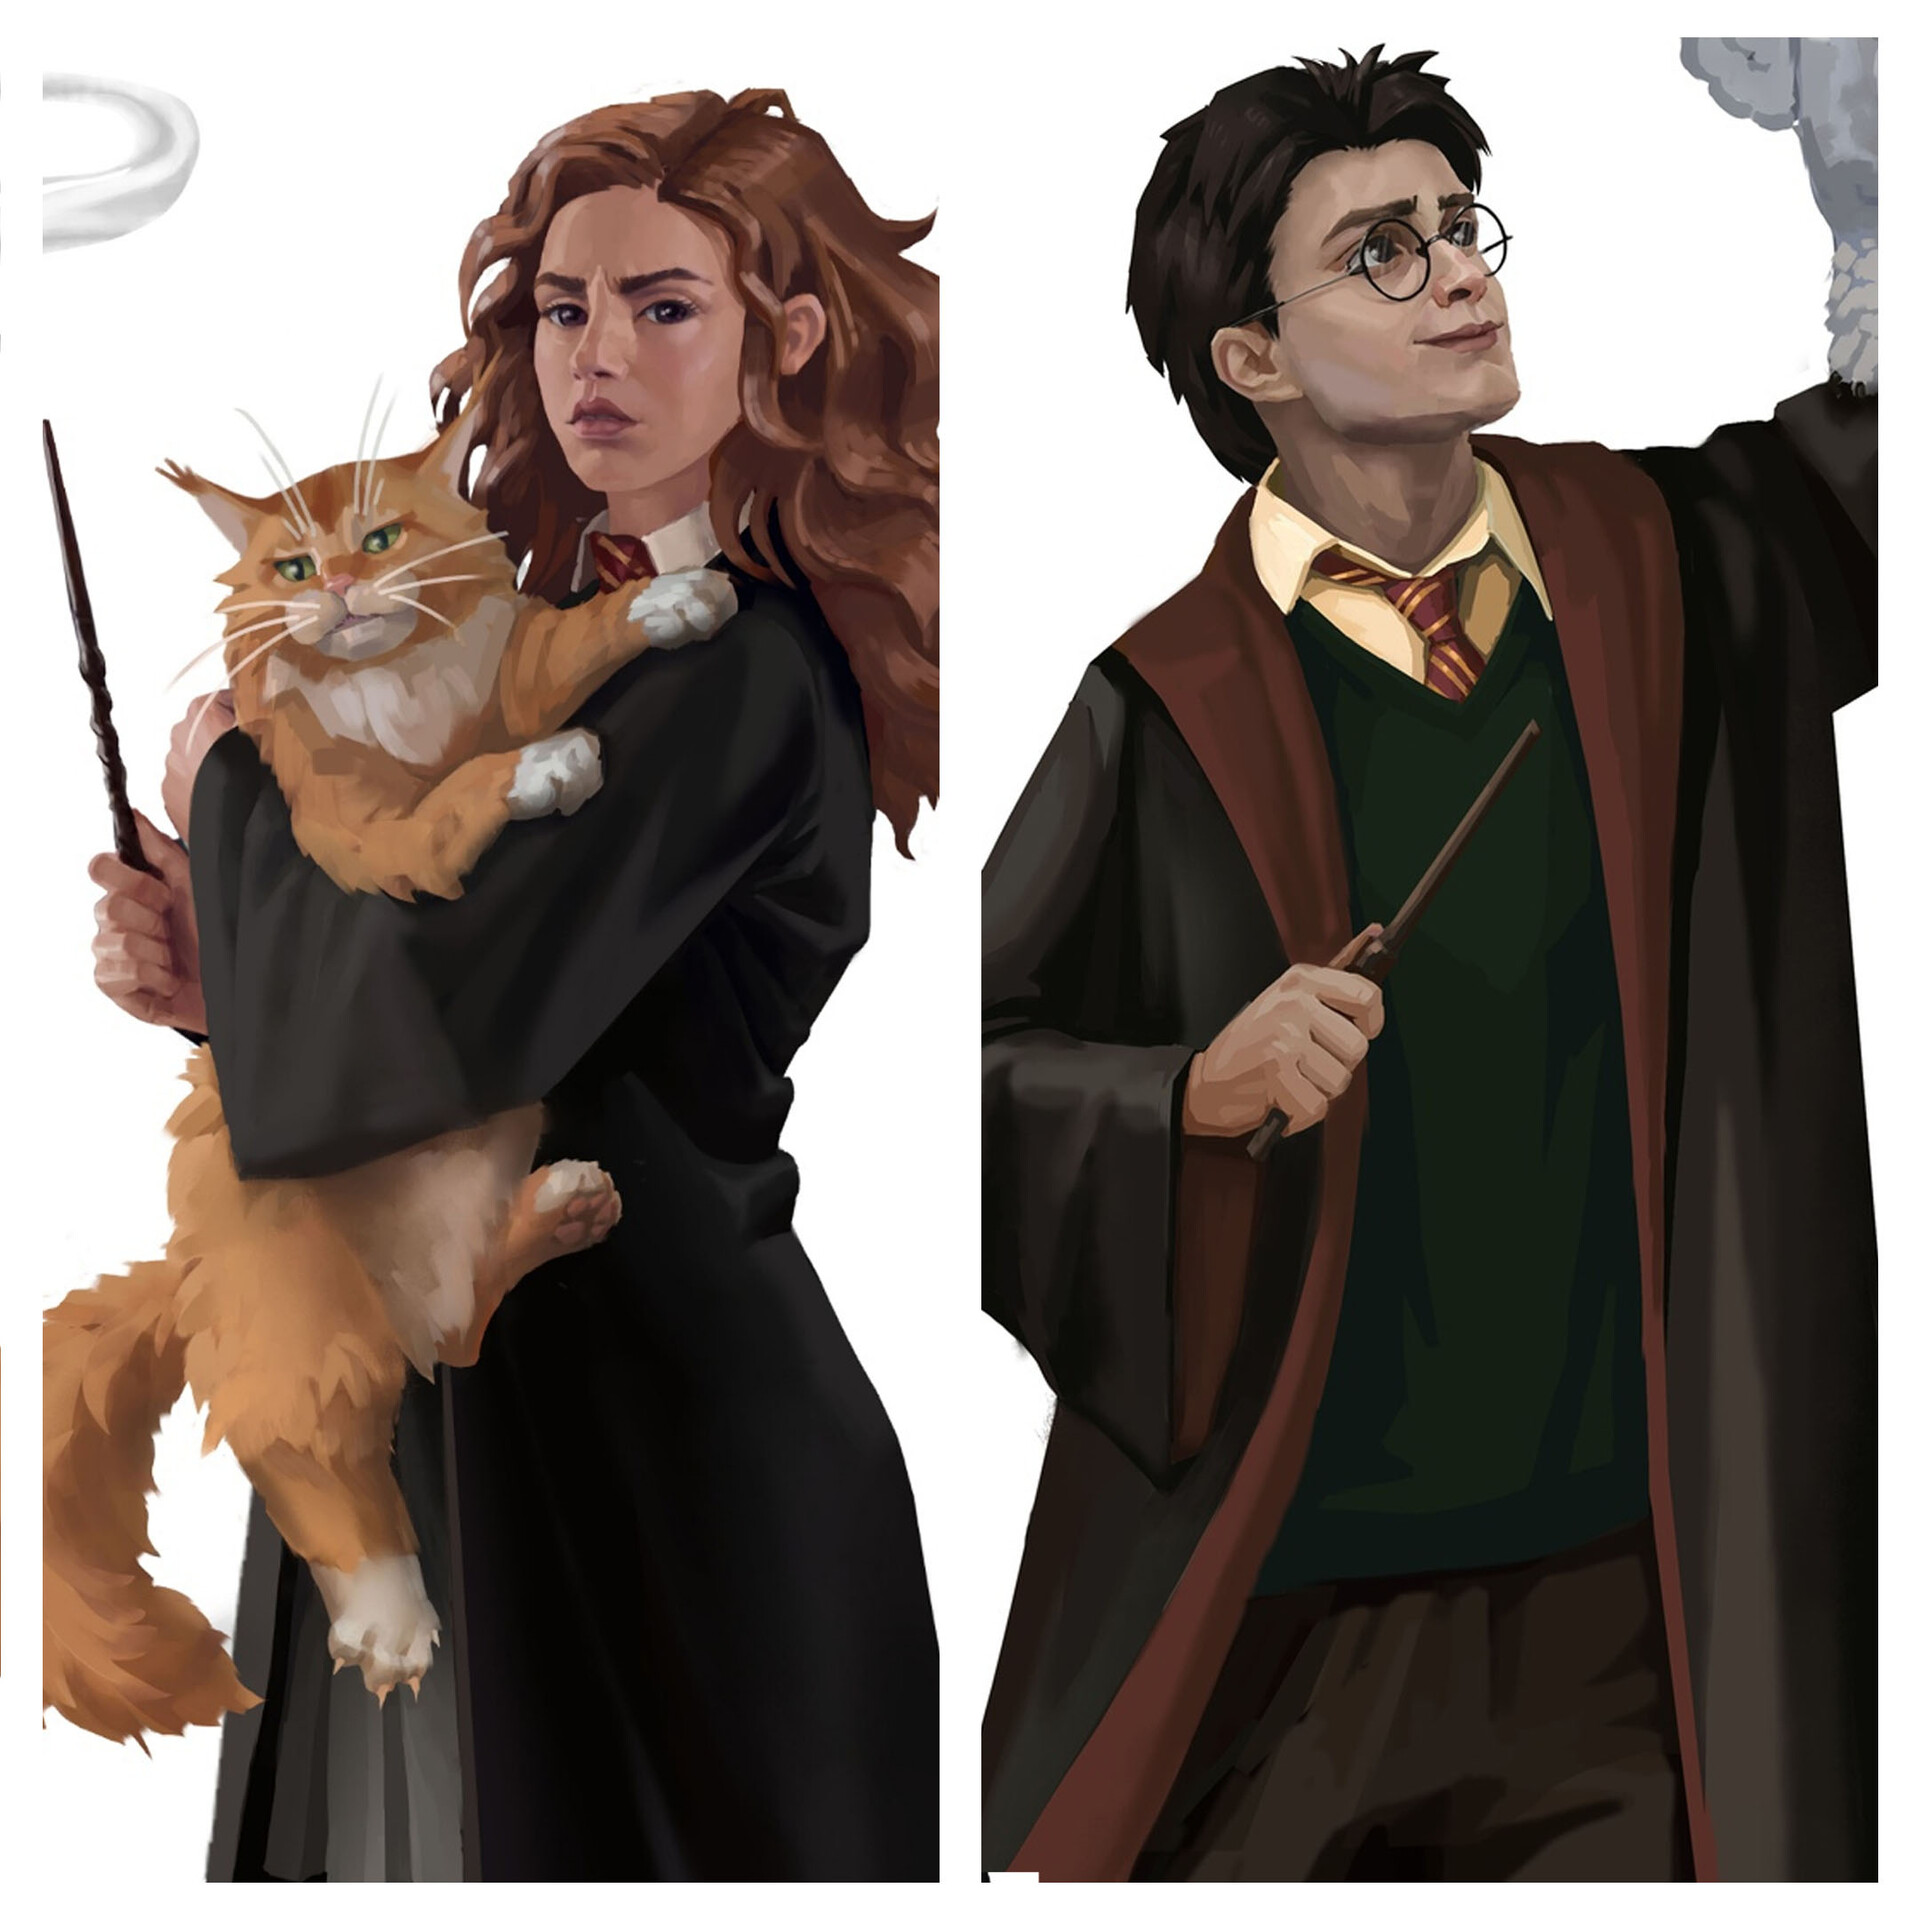 ArtStation - Harry and Hermione